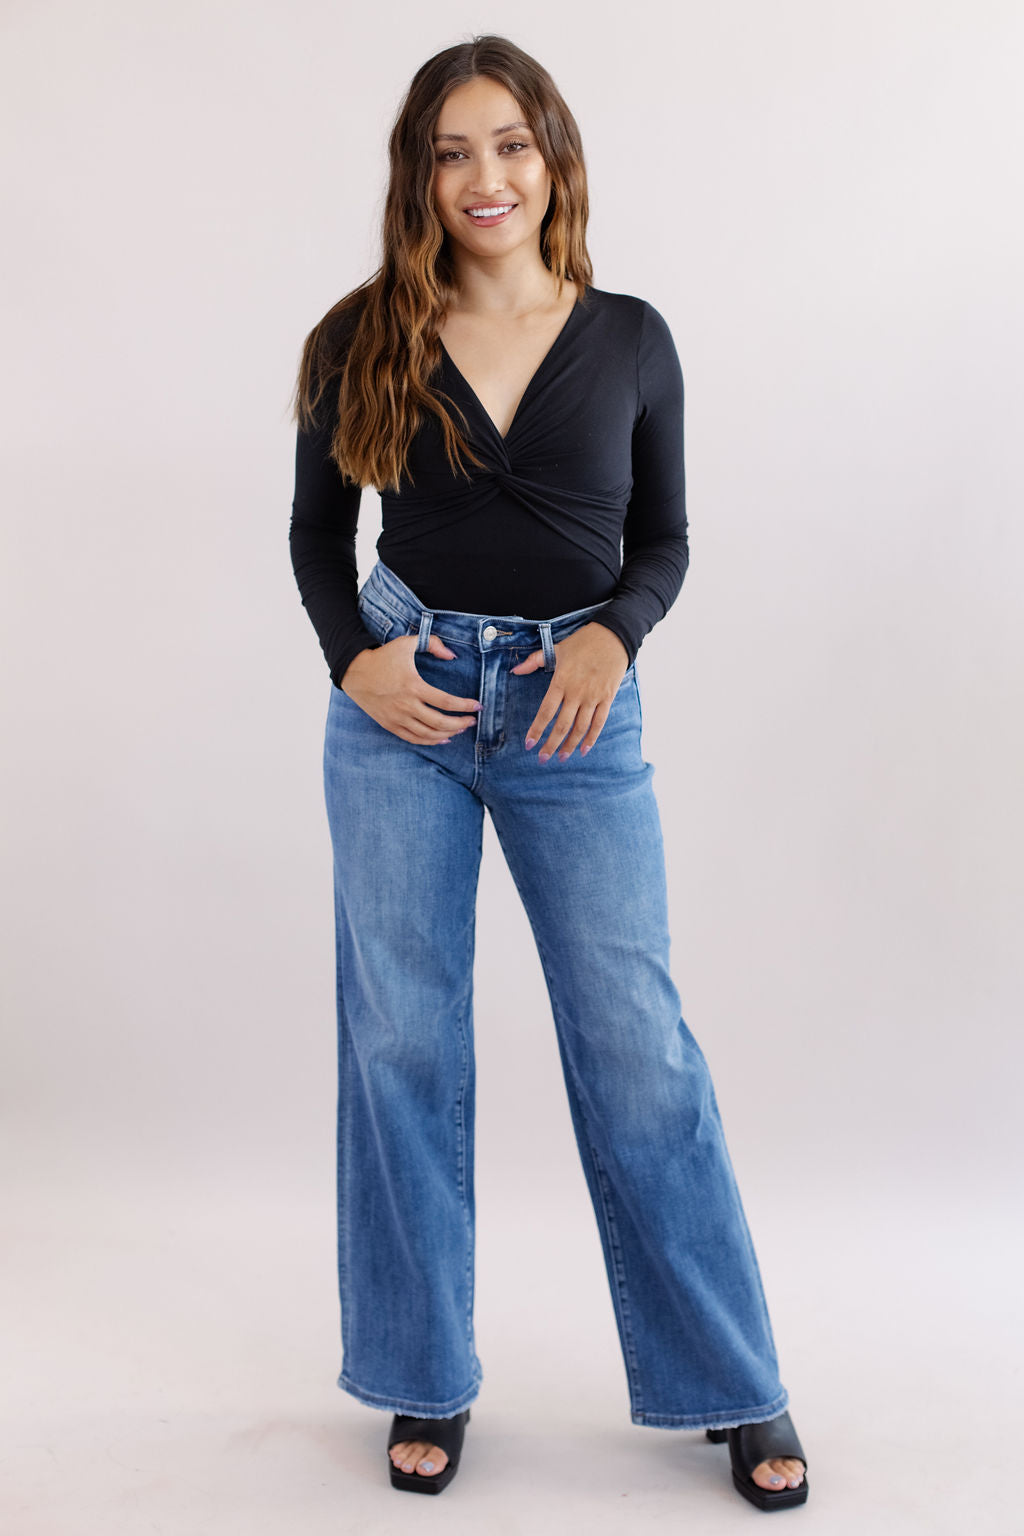 Olivia High Rise Trouser Jean - Poppy and Stella